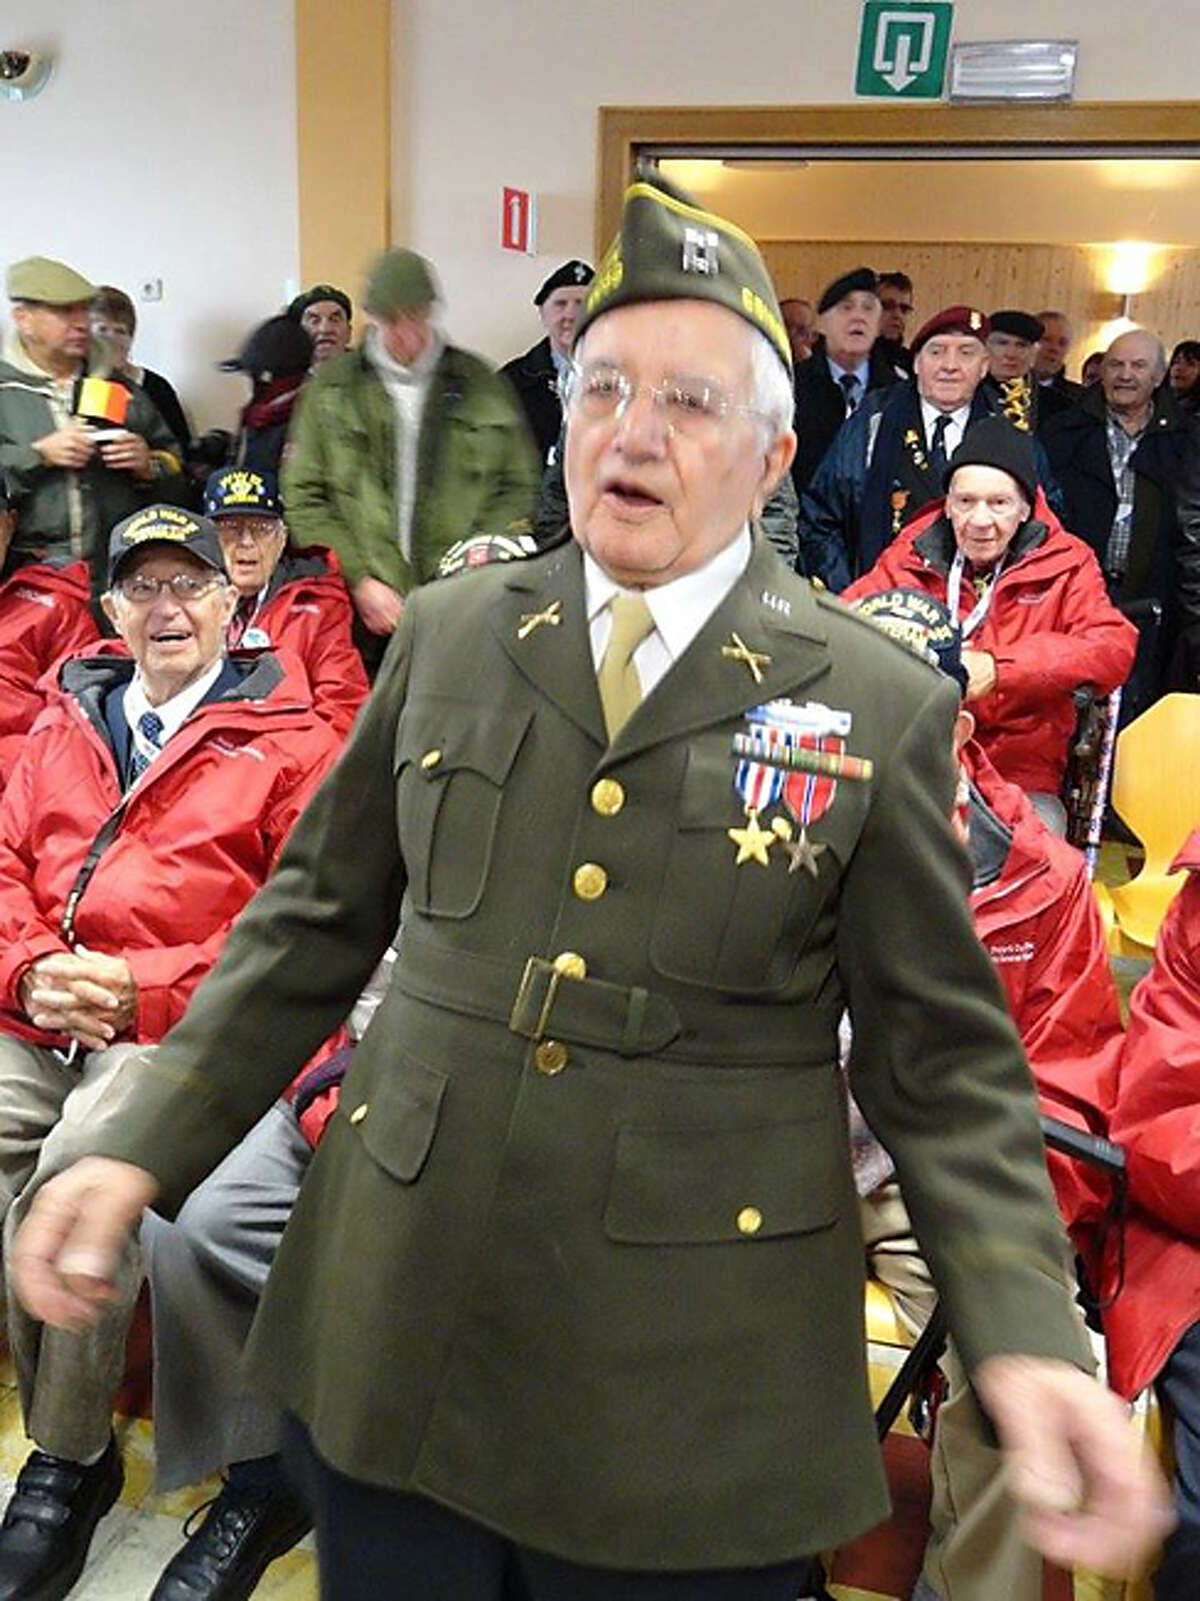 Capt. James Morgia sings a song with fellow veterans during the Battle of the Bulge anniversary events in January 2015.